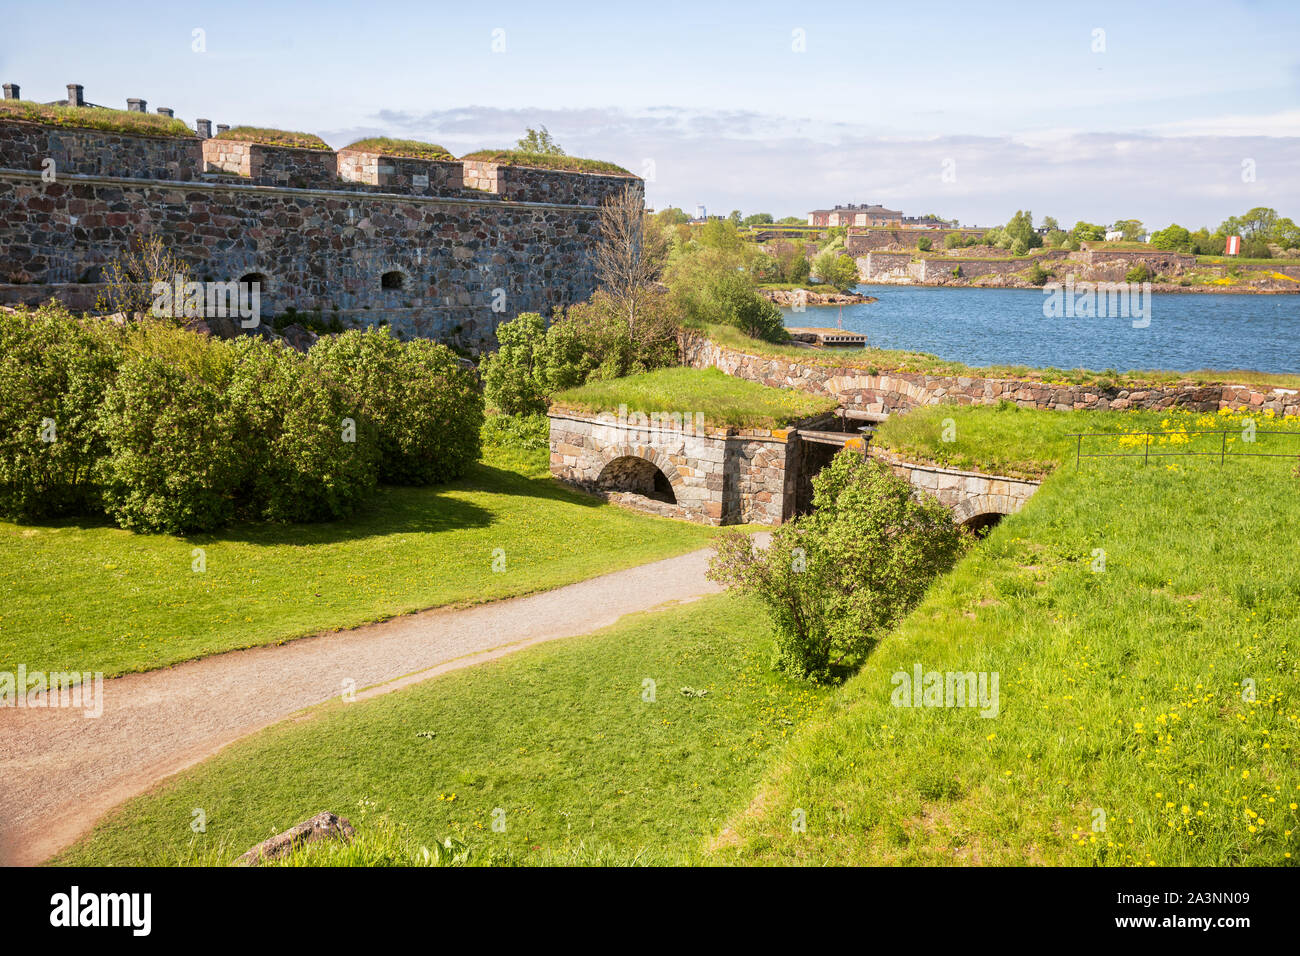 Suomenlinna Fortress (or Sveaborg), view of the King's Gate and the Lantingshausen bastion, Helsinki, Finland Stock Photo